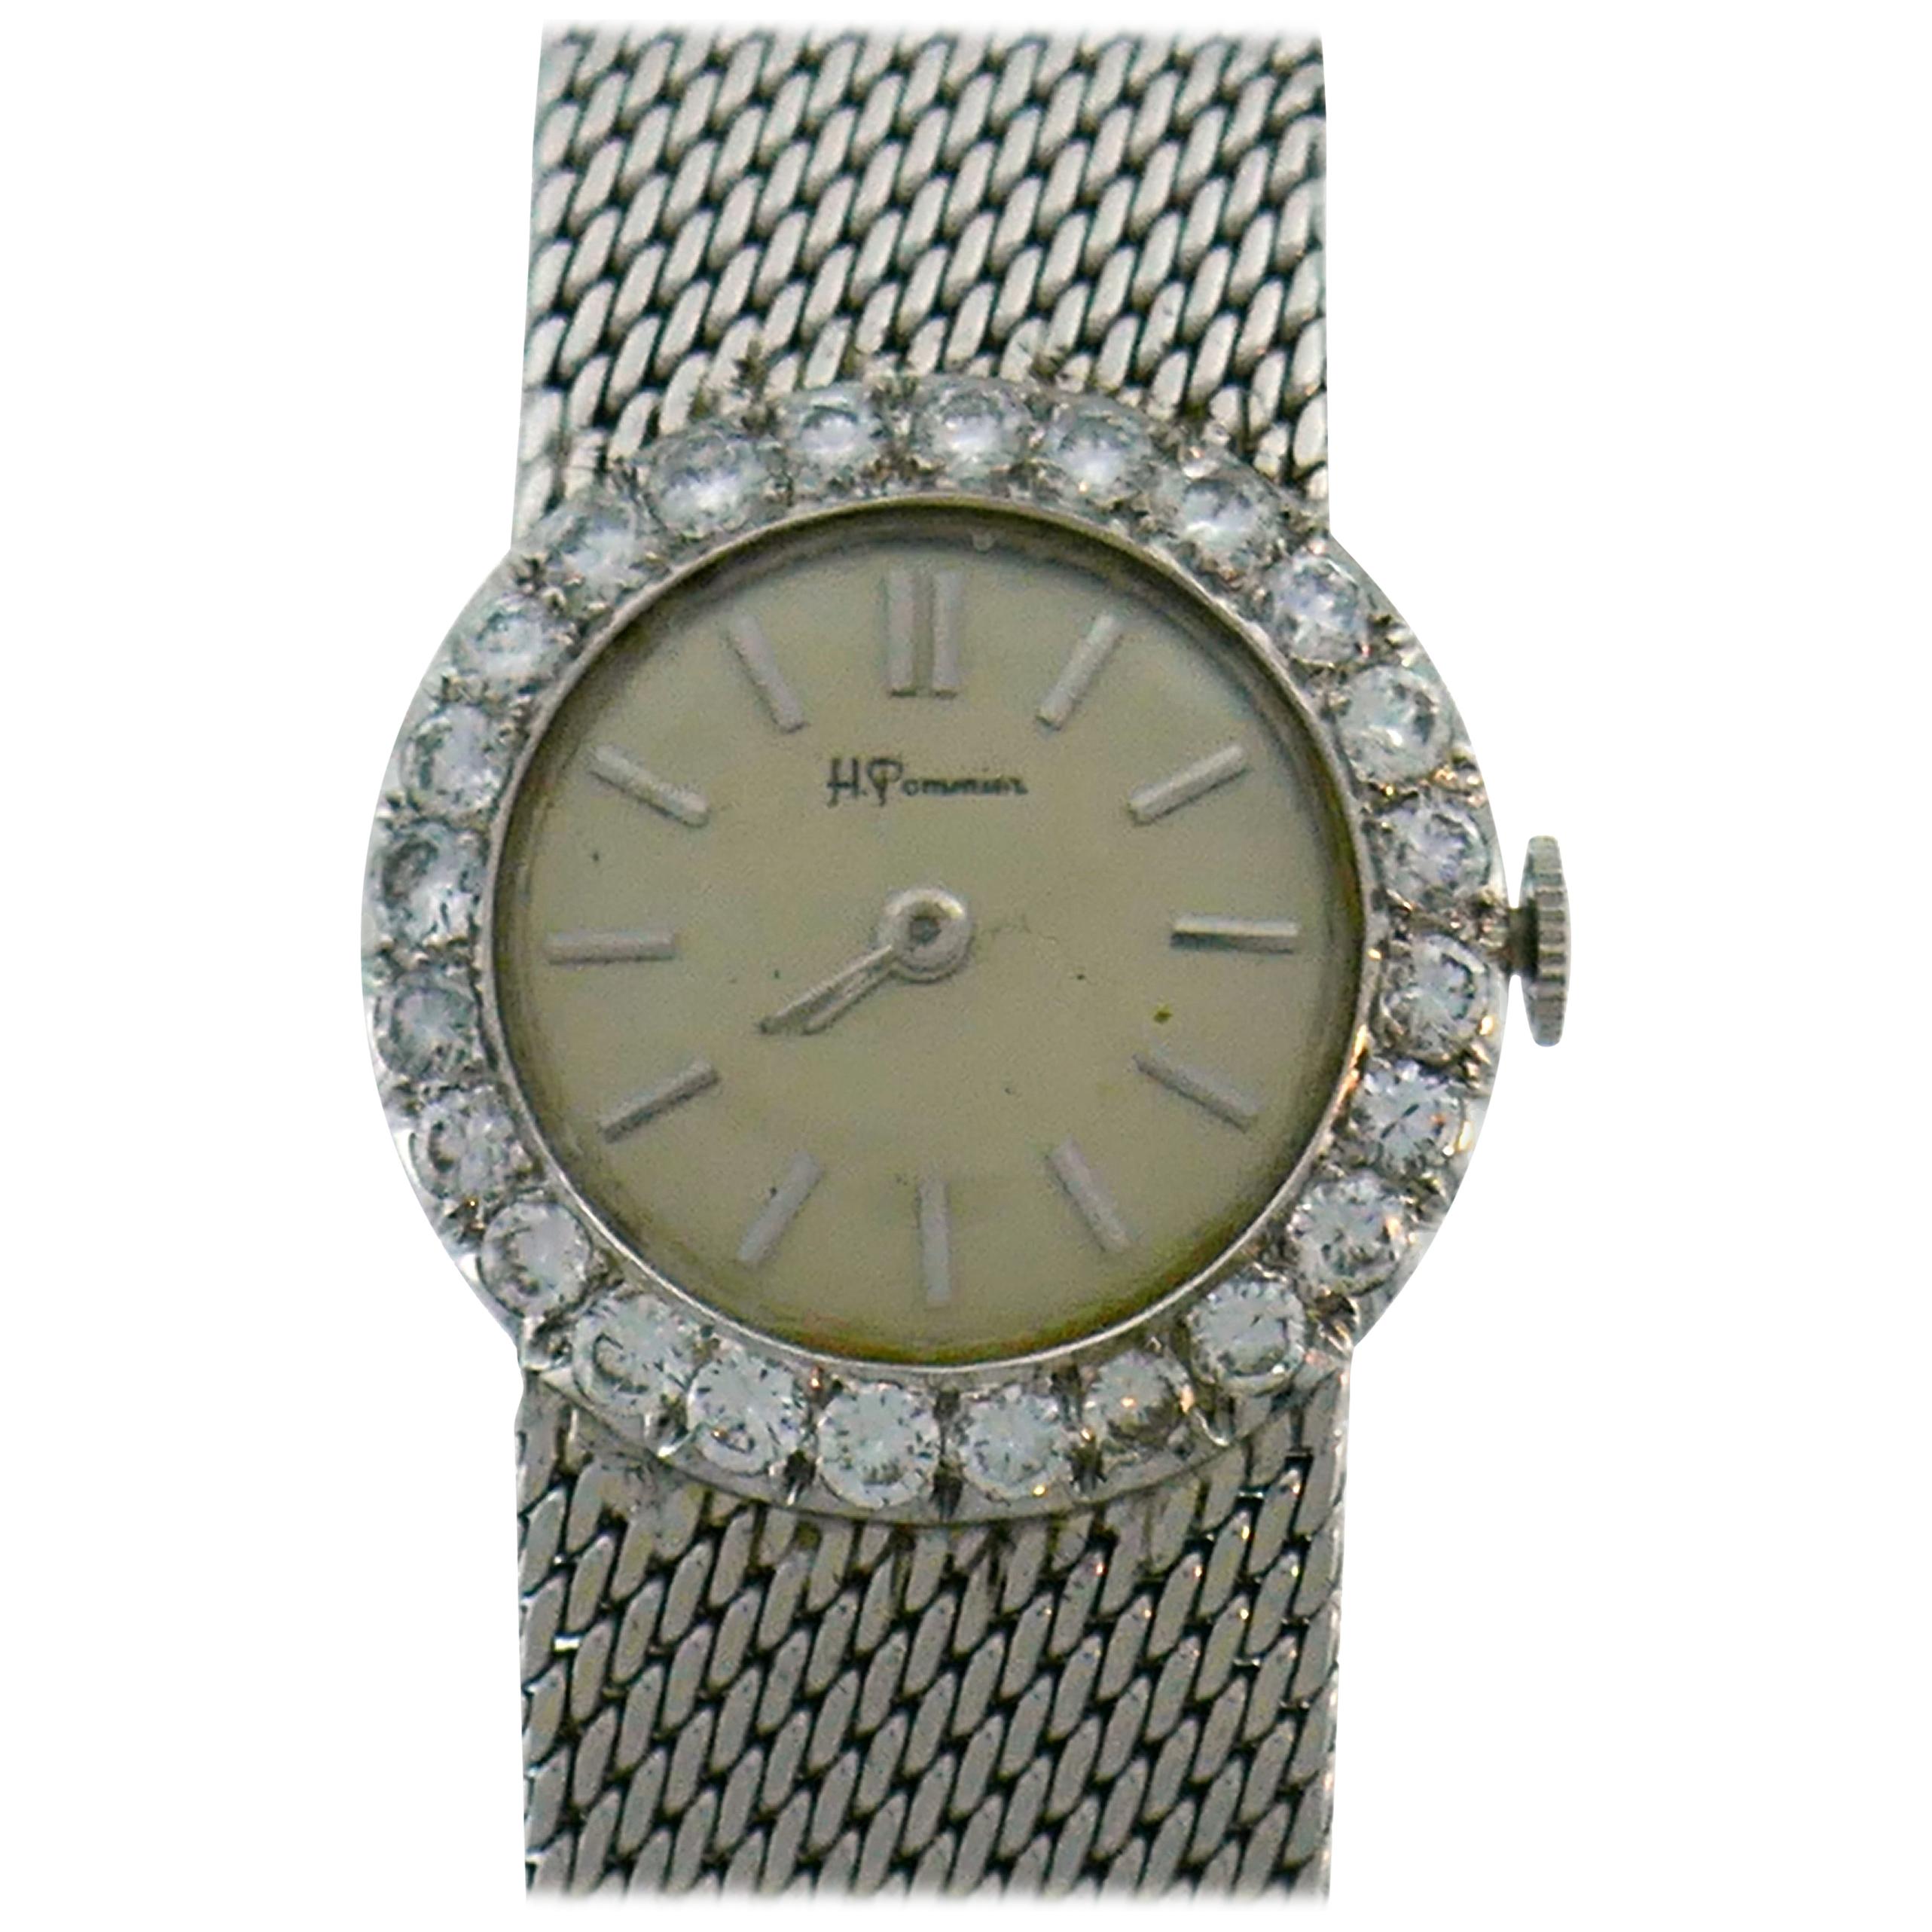 Vintage Ebel White Gold Diamond Wristwatch Retailed by H. Pommier, 1950s